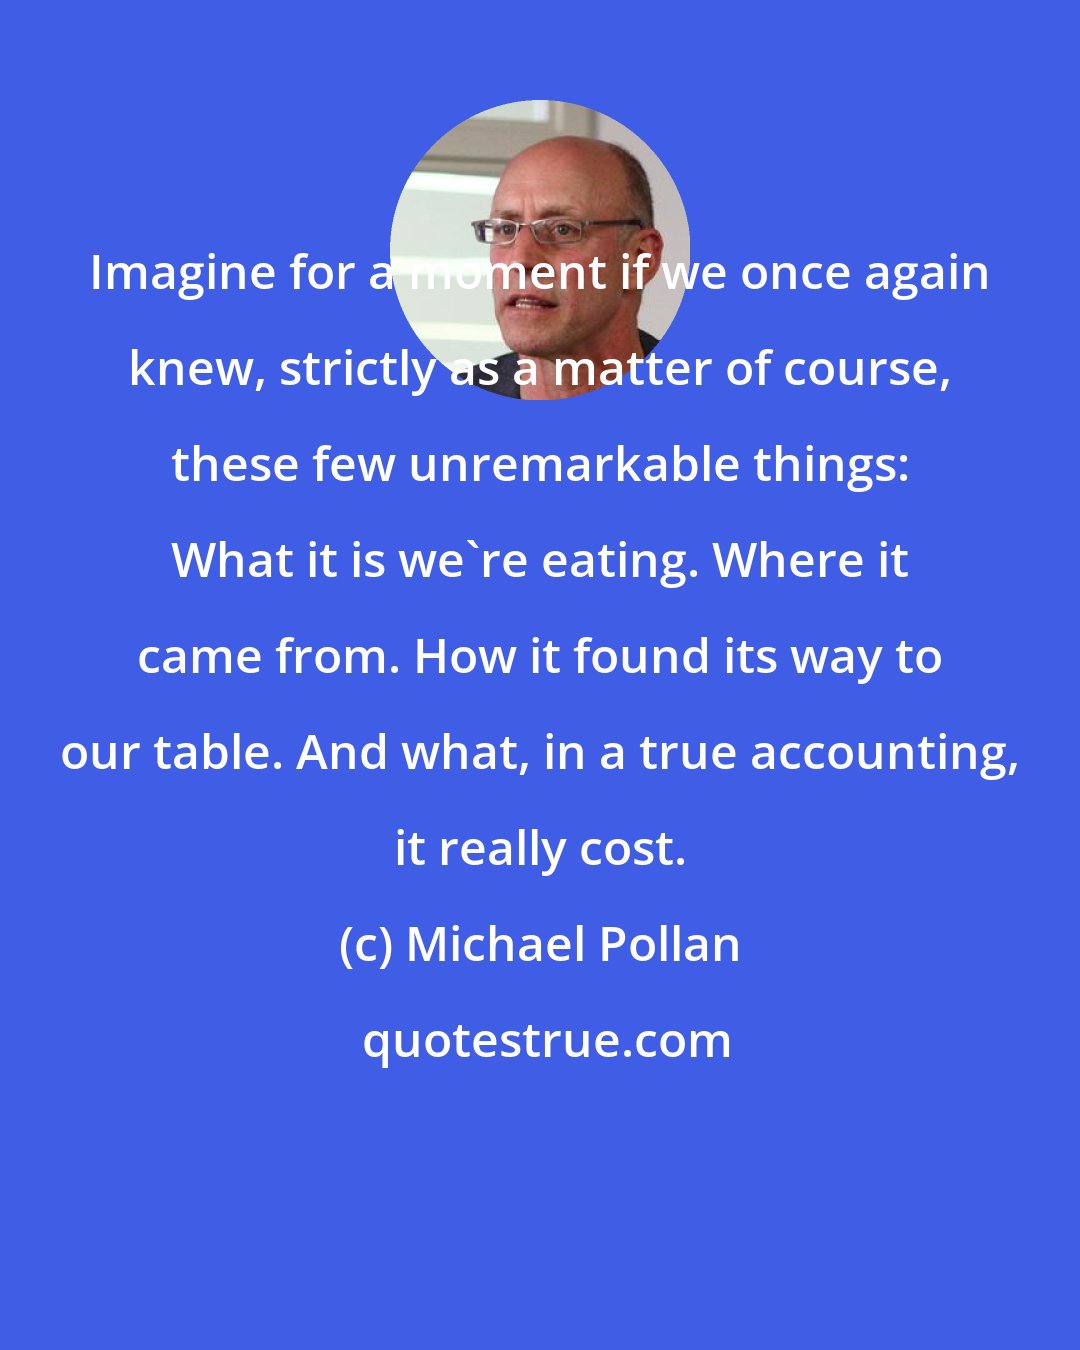 Michael Pollan: Imagine for a moment if we once again knew, strictly as a matter of course, these few unremarkable things: What it is we're eating. Where it came from. How it found its way to our table. And what, in a true accounting, it really cost.